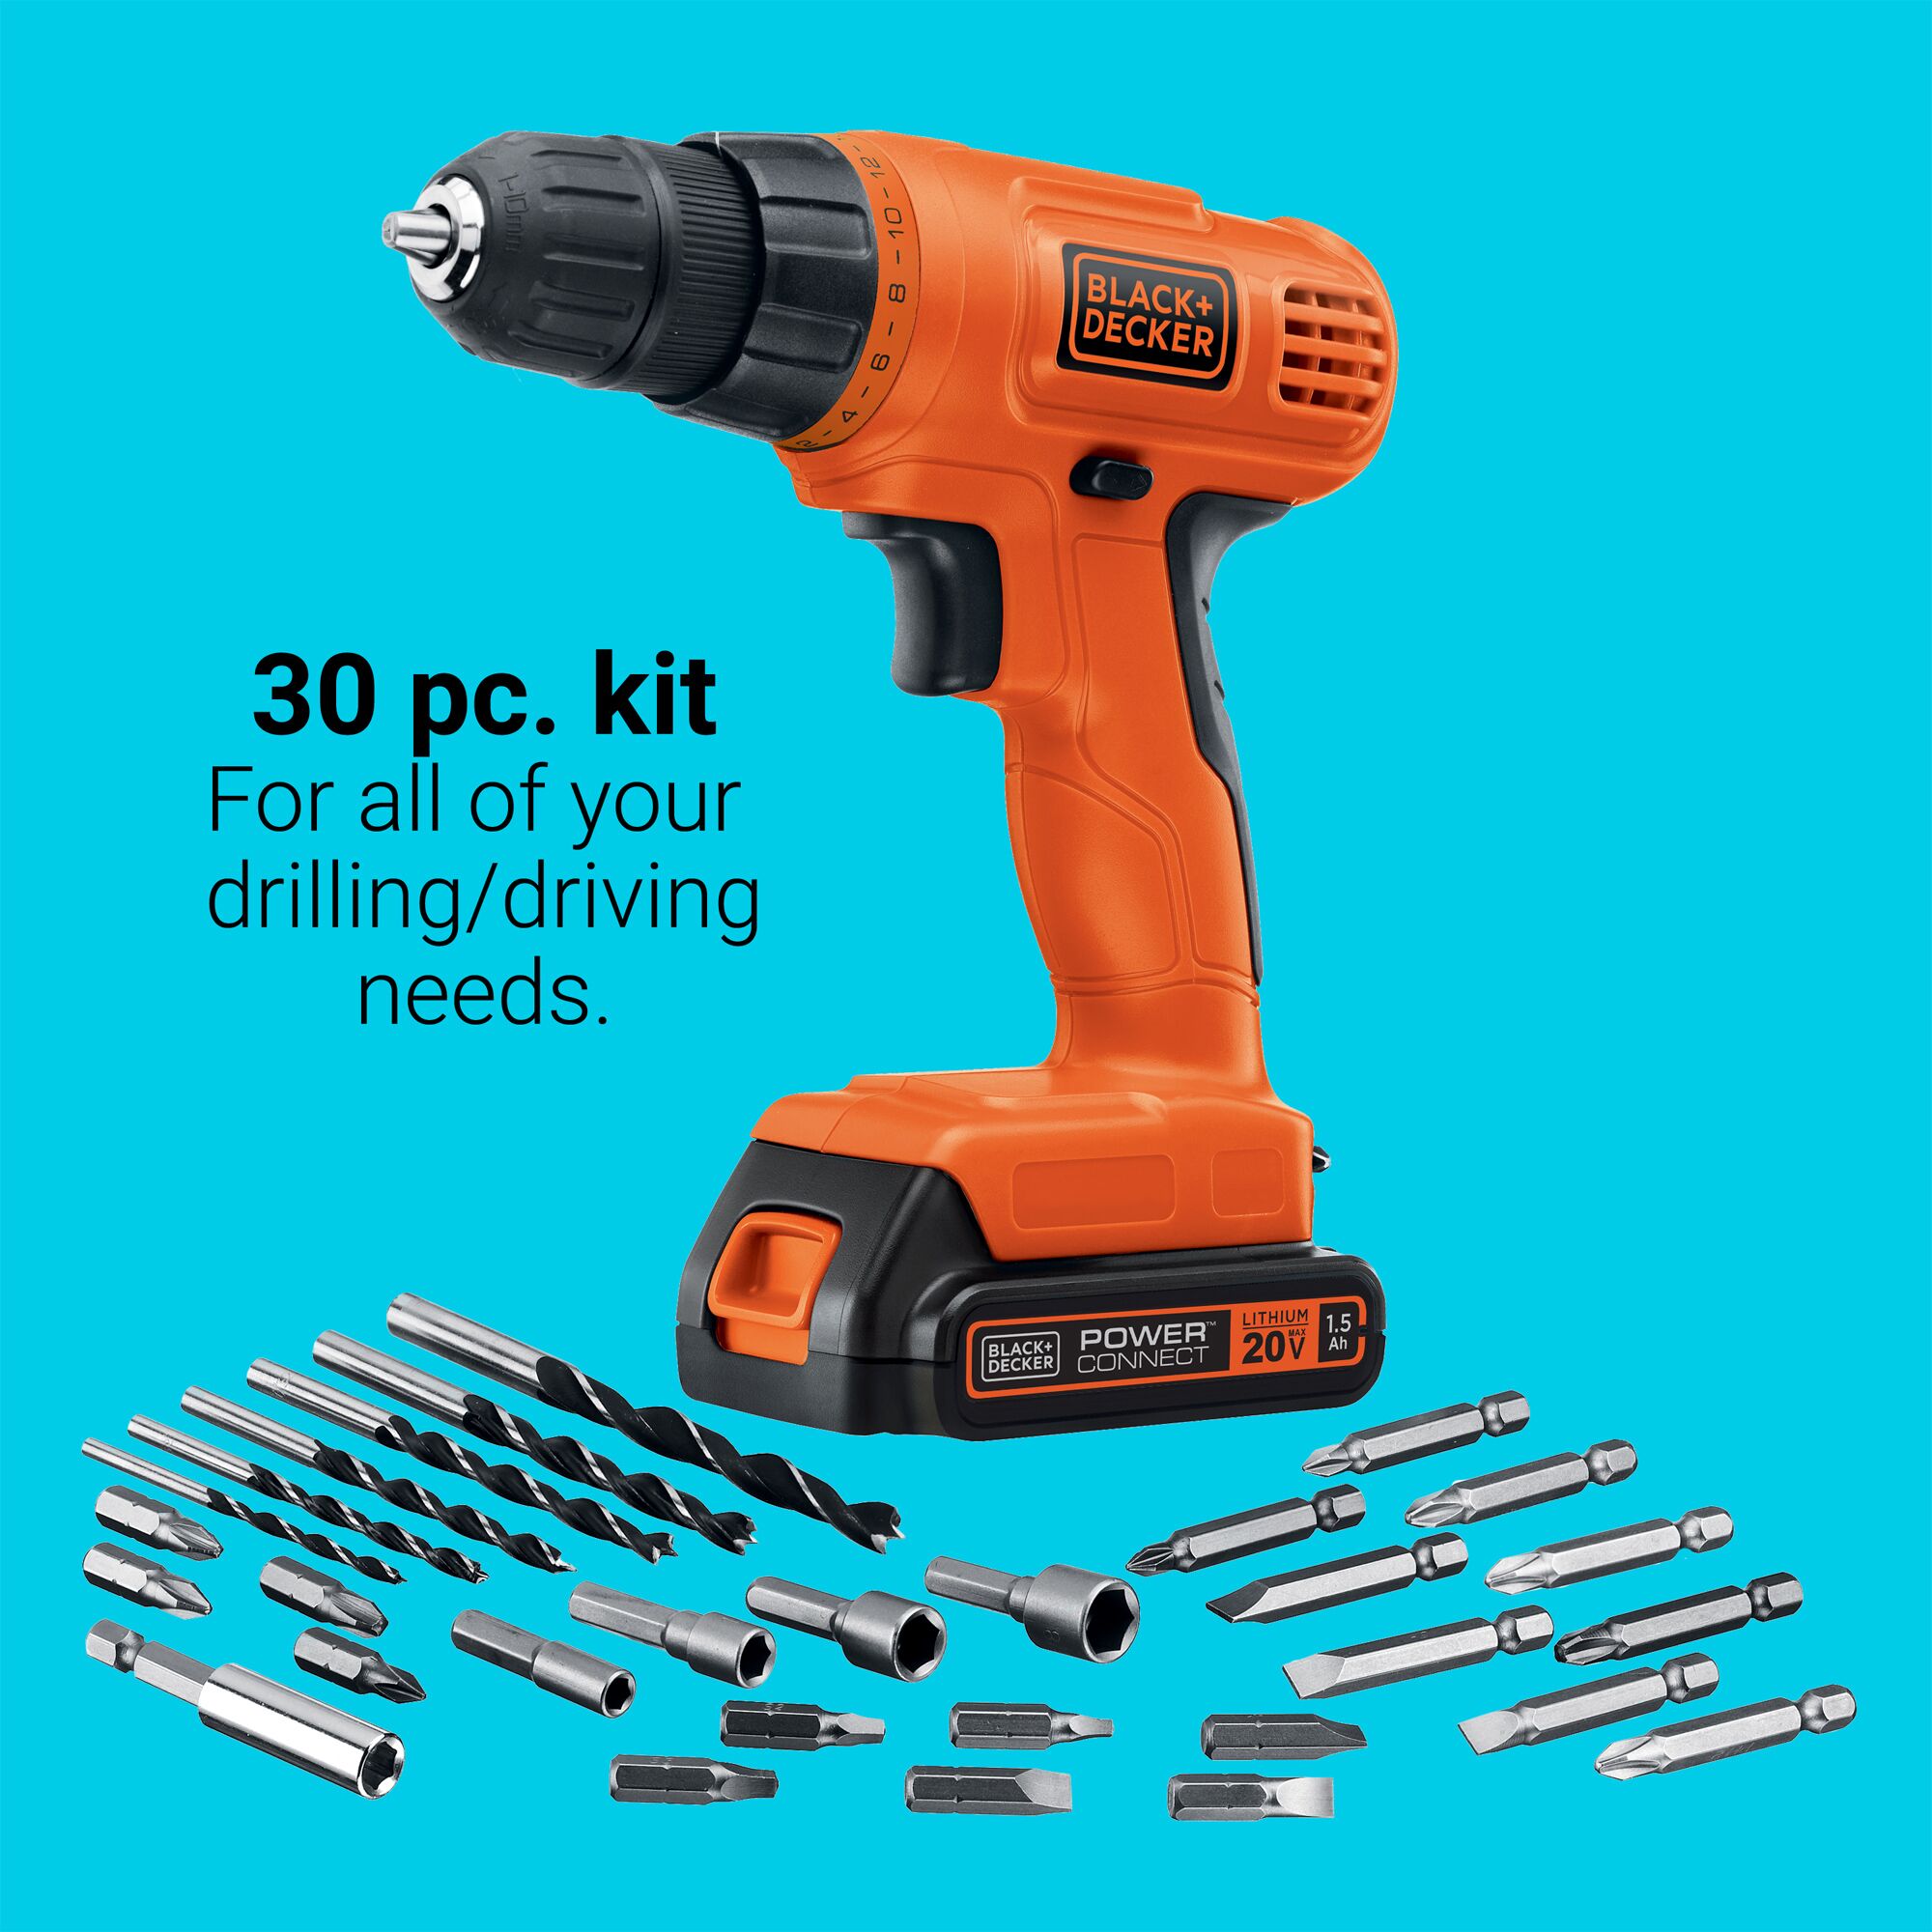 Black & Decker BDC120VACA 20V Cordless Drill with Battery, Charger & 100-pc  Accessory Set, 3/8-in